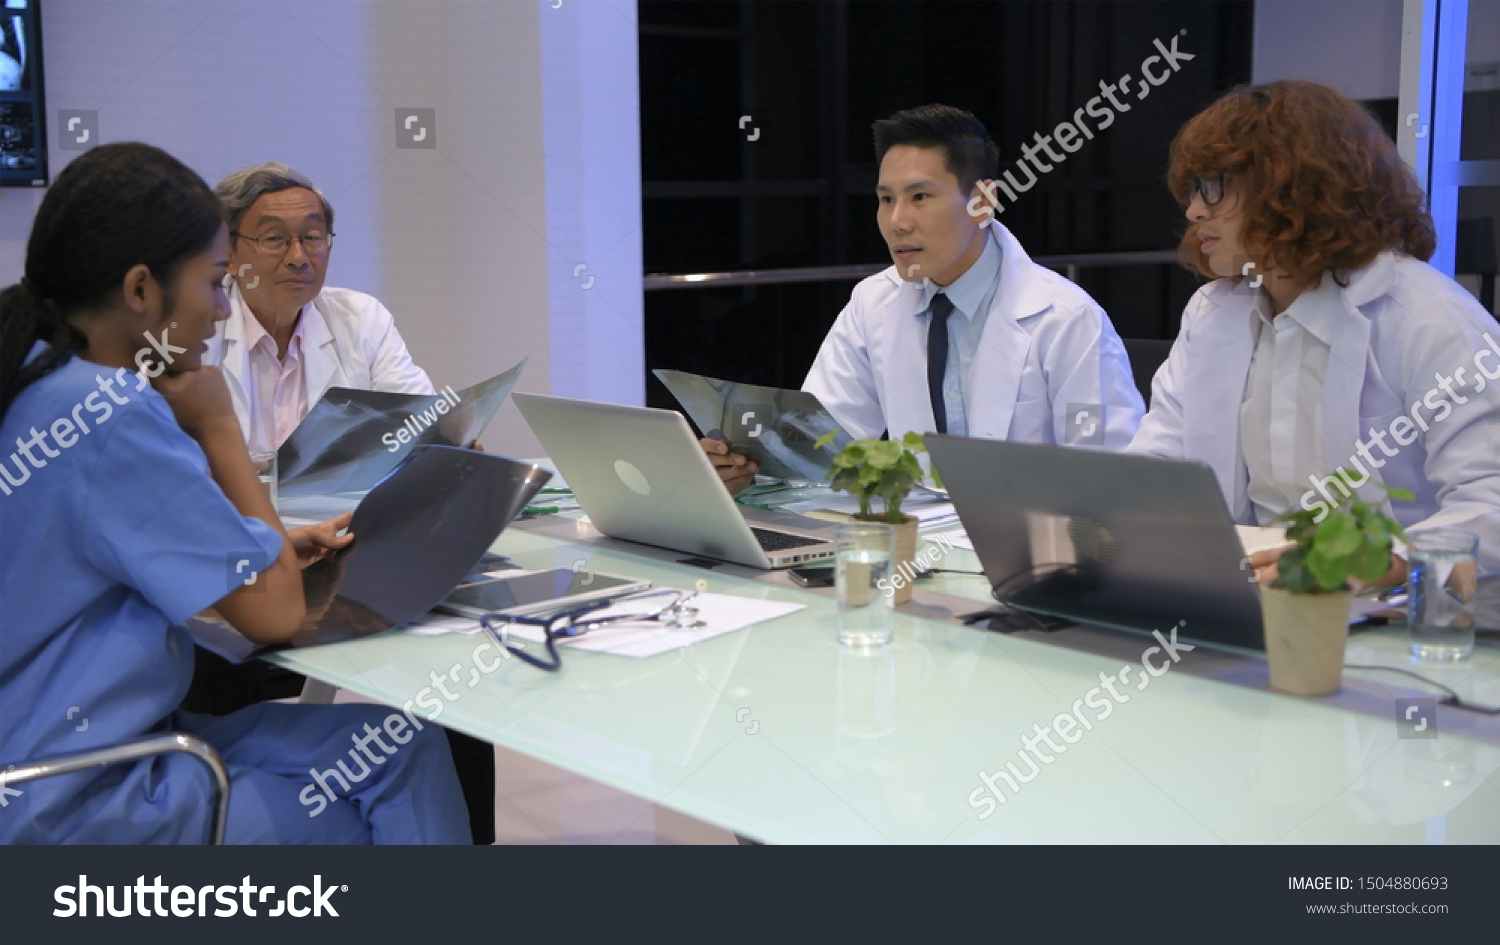 Medical concept. Medical concept.Doctors are brainstorming for conclusions about the research. 4k Resolution. #1504880693